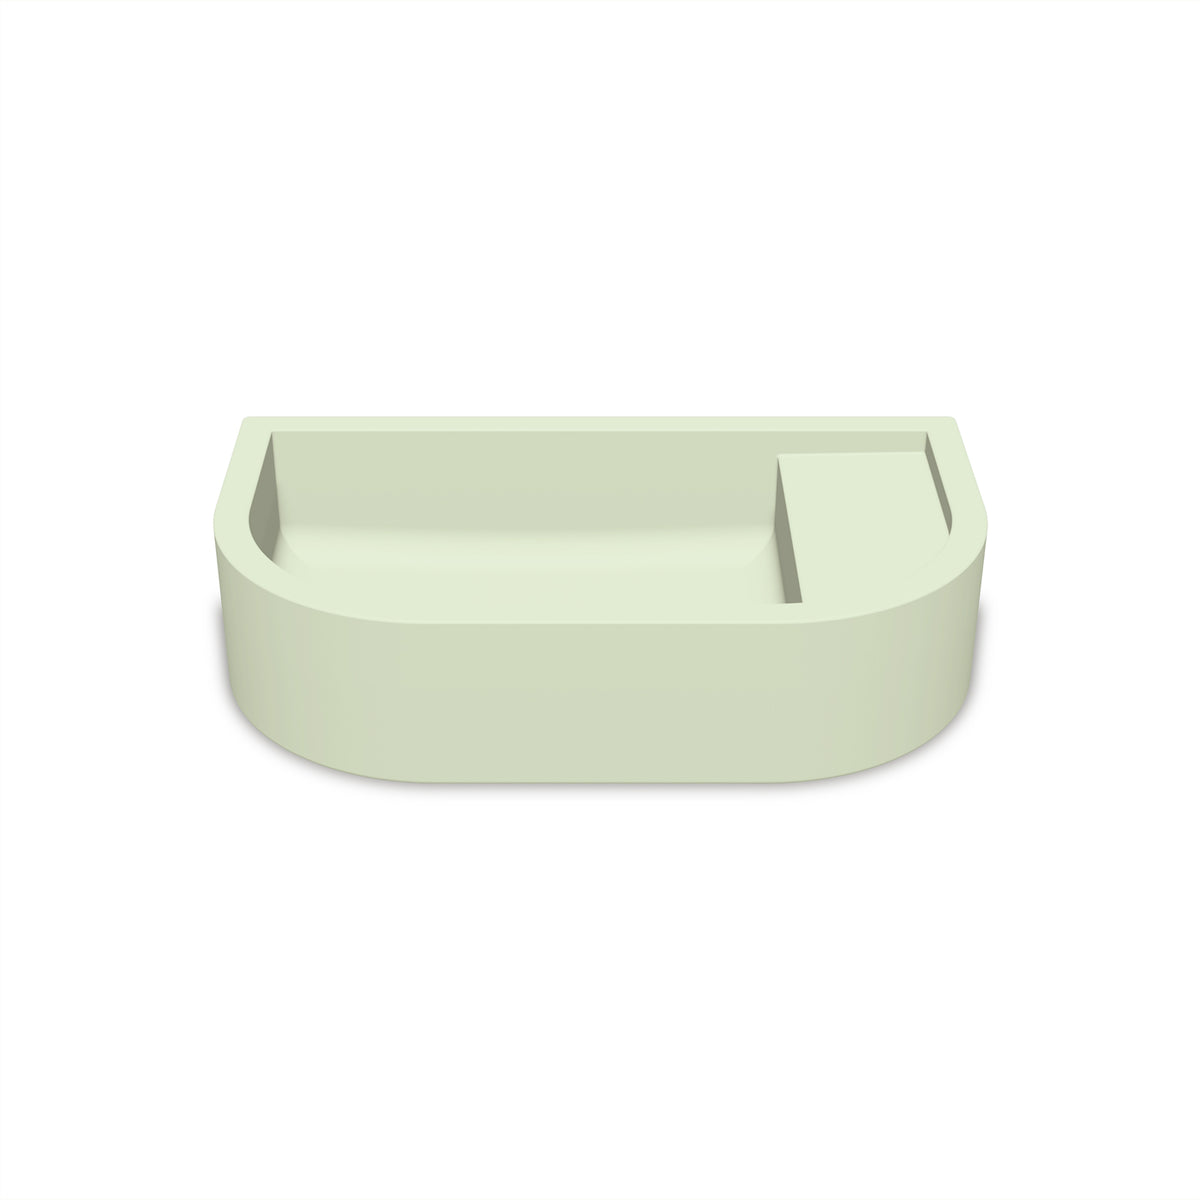 Loop 02 Basin - Overflow - Wall Hung (Mint,No Tap Hole,Chrome)